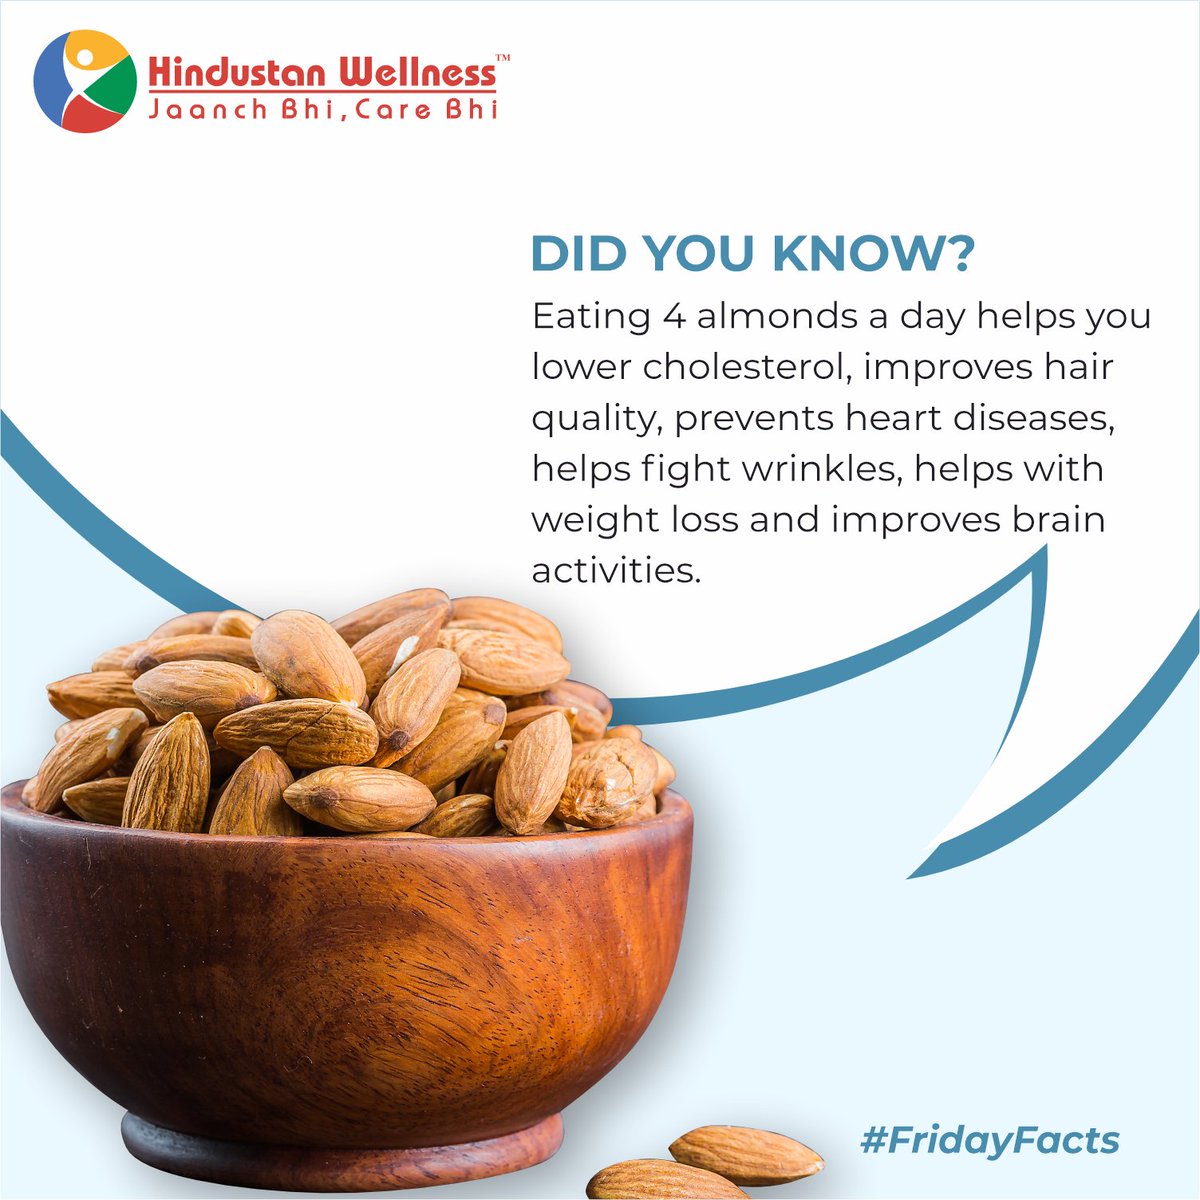 Did you know?

#didyouknow #almonds #almondsbenefits #healthylifestyle #healthylife #healthcare #healthy #healthandwellness #healthiswealth #healthyliving #jaanchbhicarebhi #HindustanWellness